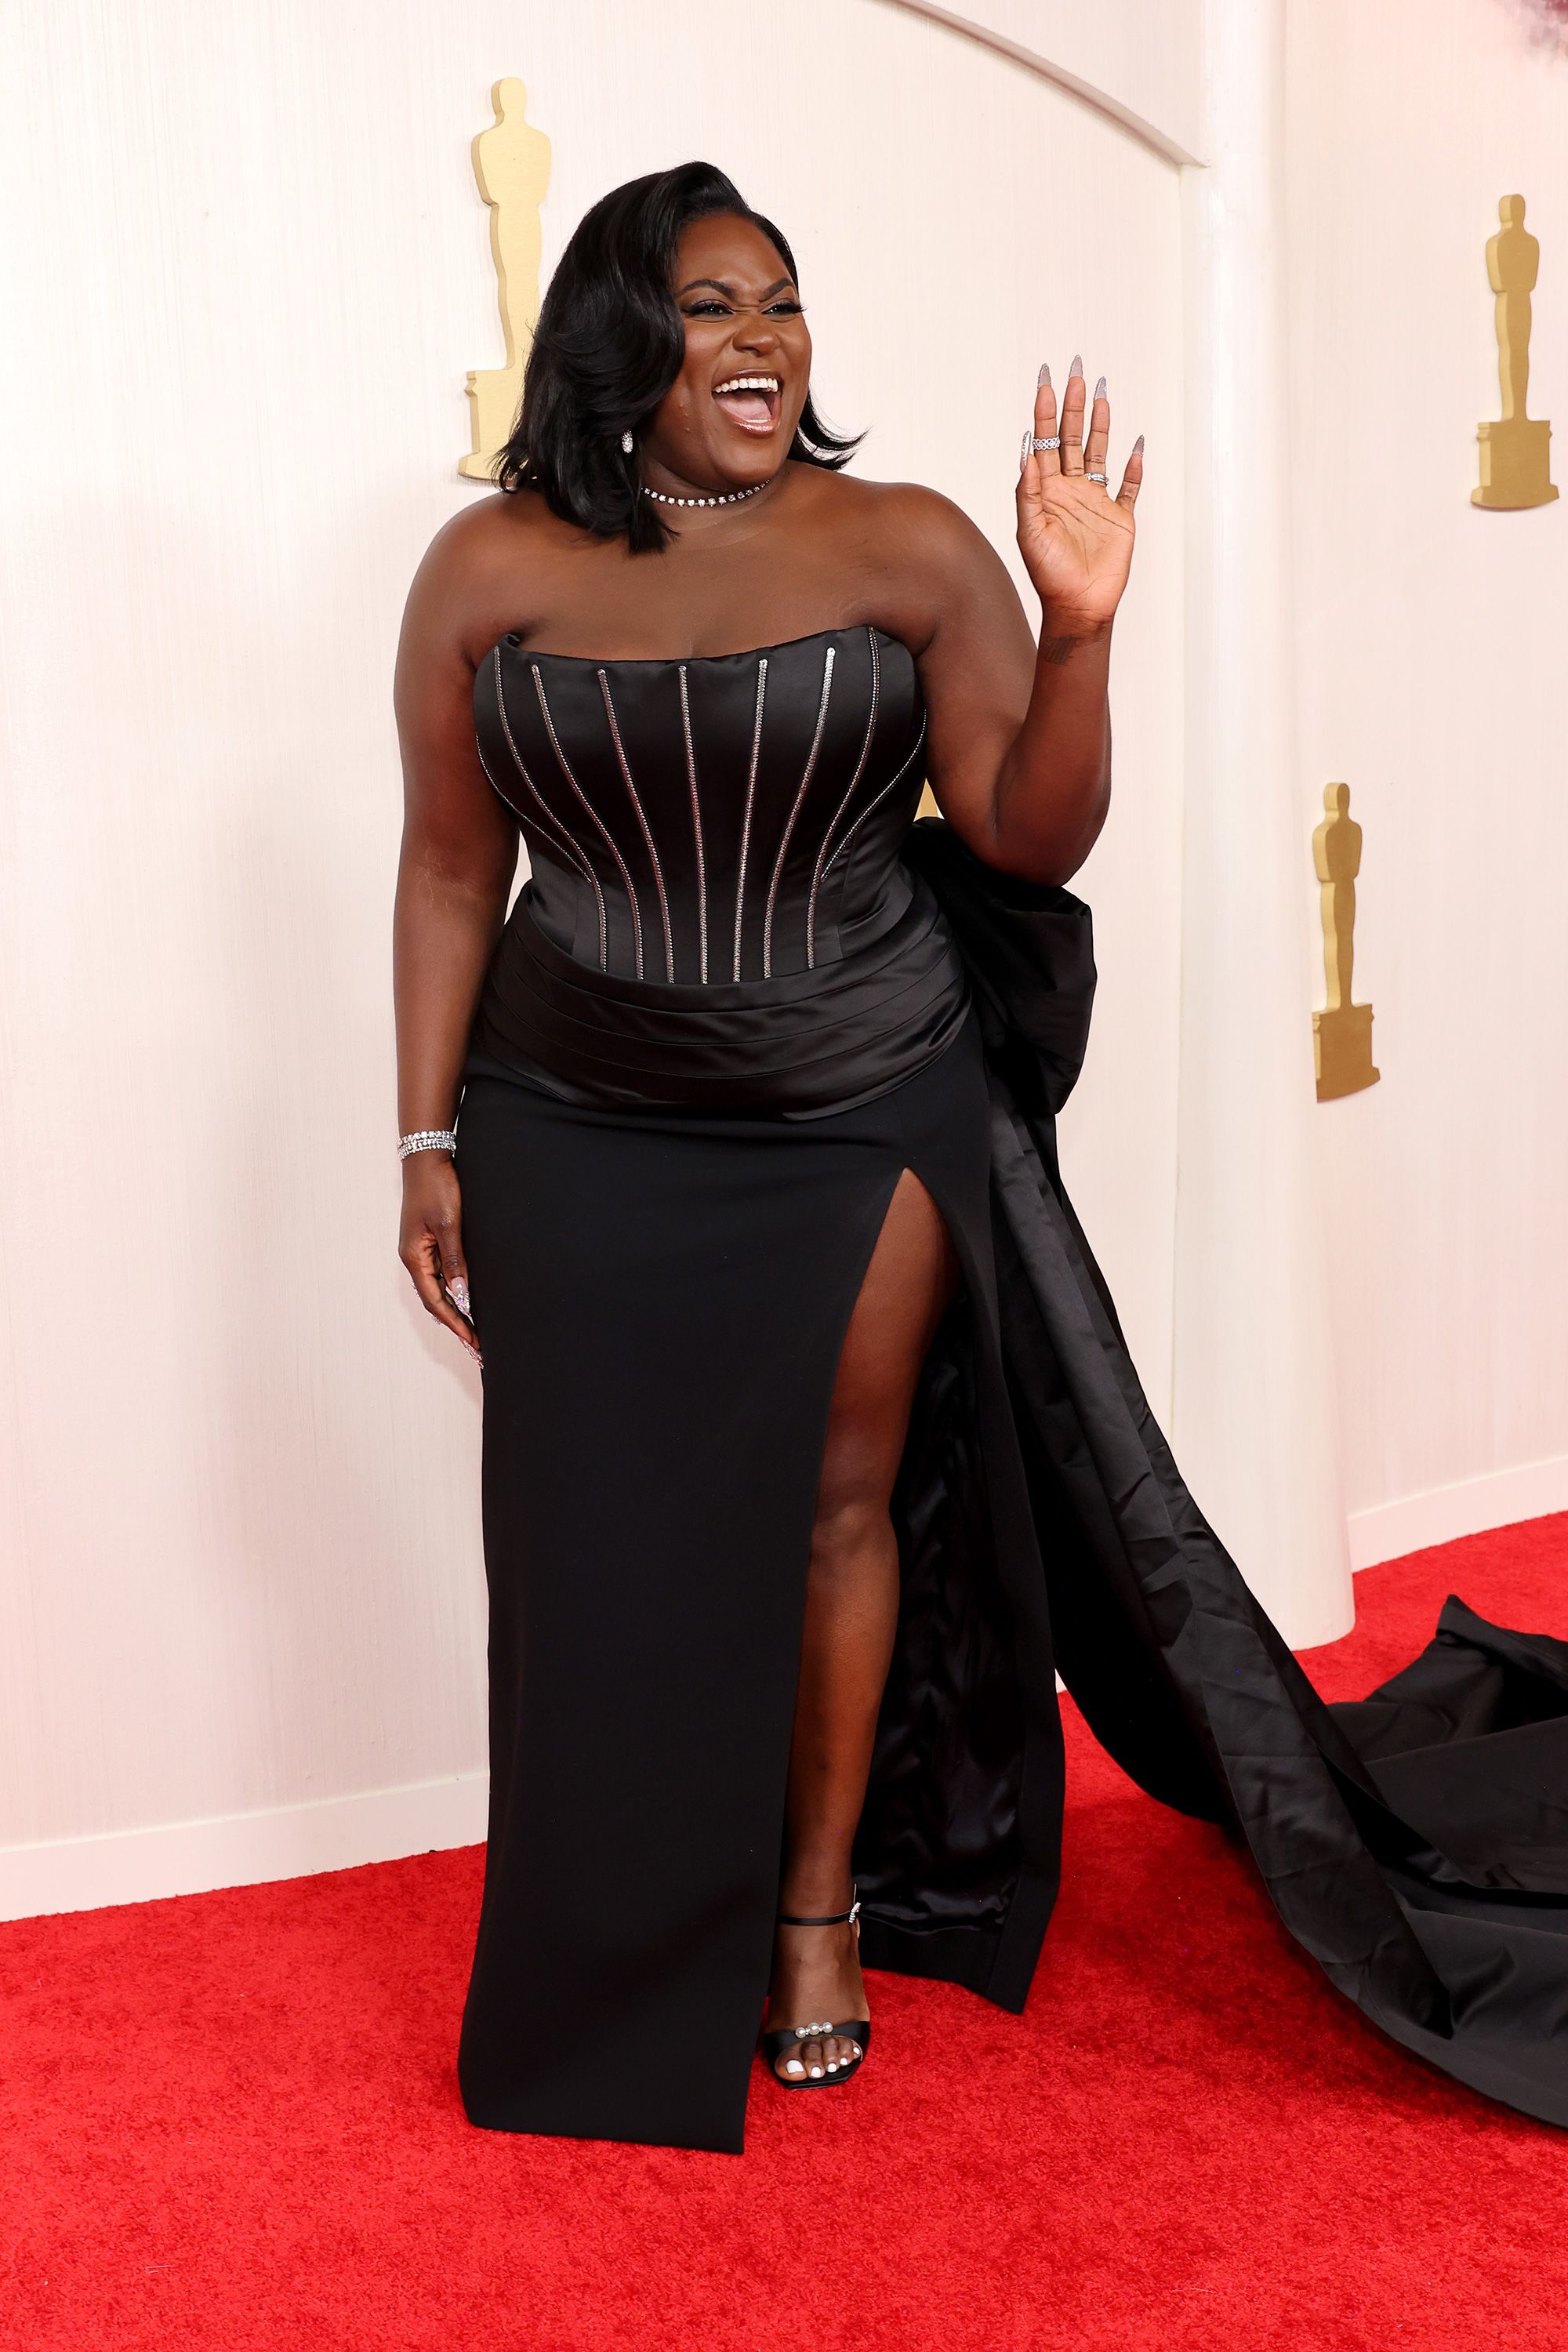 Danielle Brooks arrived in a bedazzled satin dress with exposed metal boning detailing, by Dolce & Gabbana.